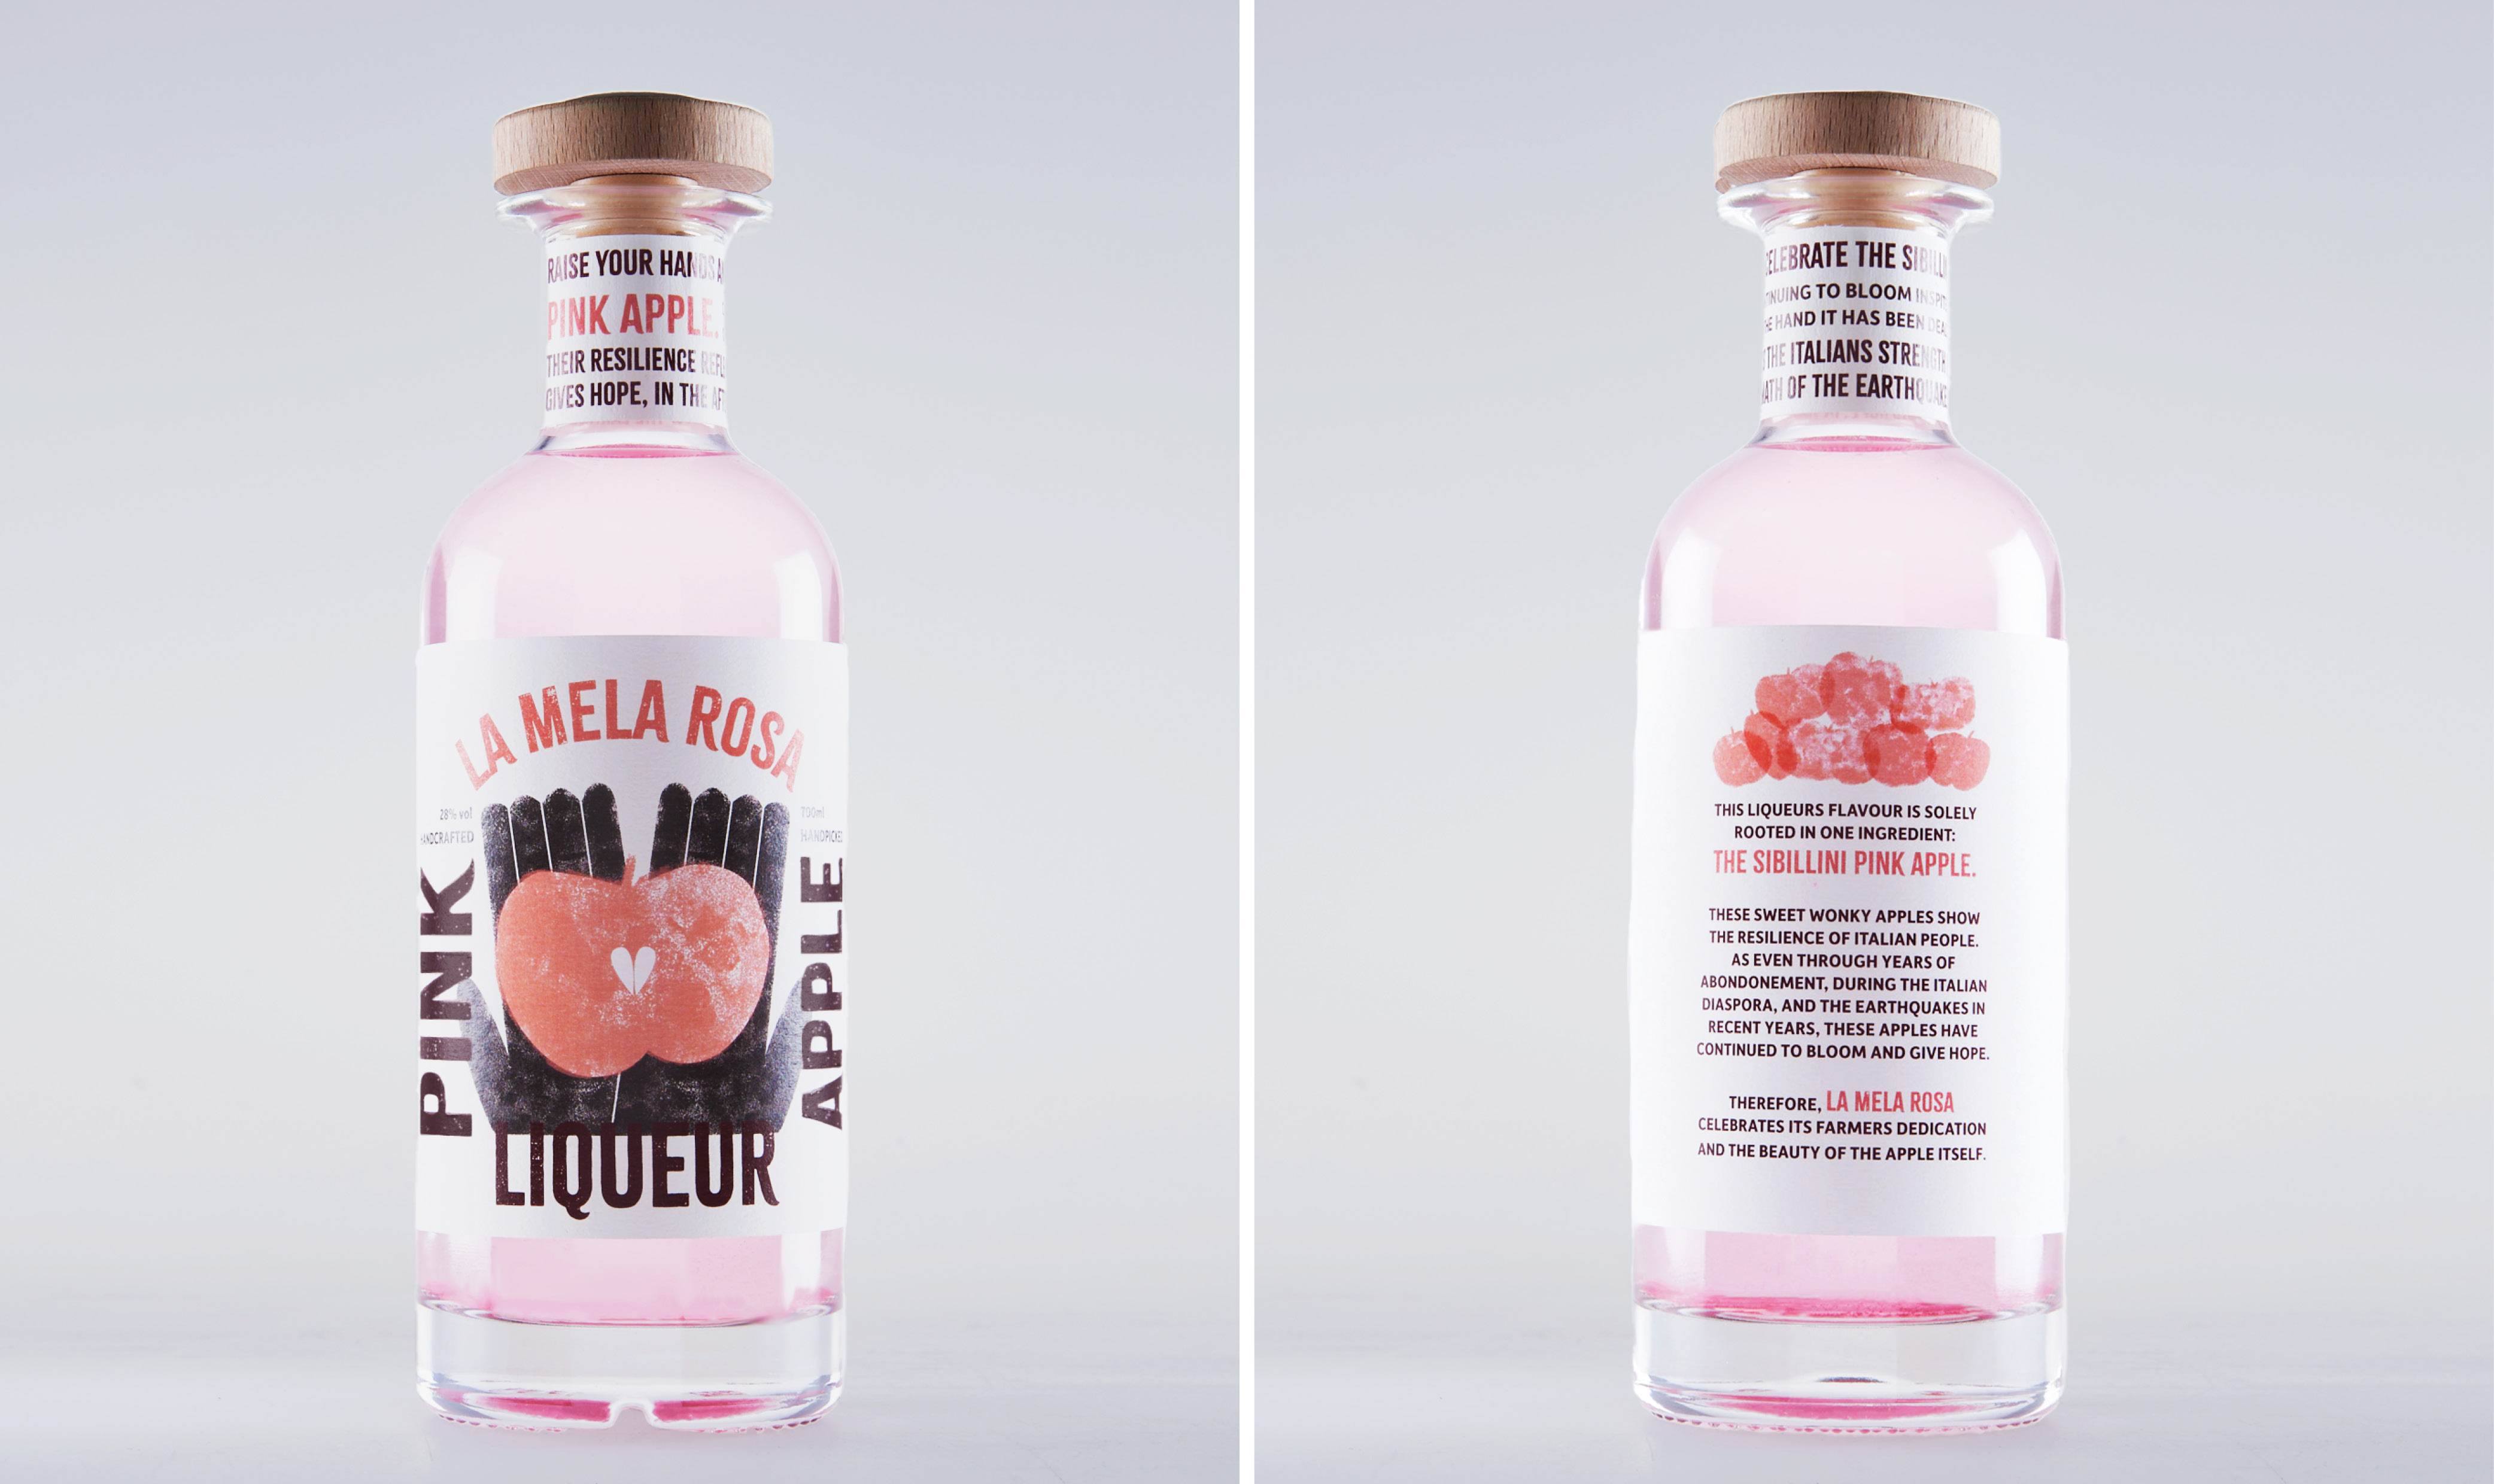 Graphic Design work by Magdalena Horos showing Pink Apple Liqueur bottle front and back.